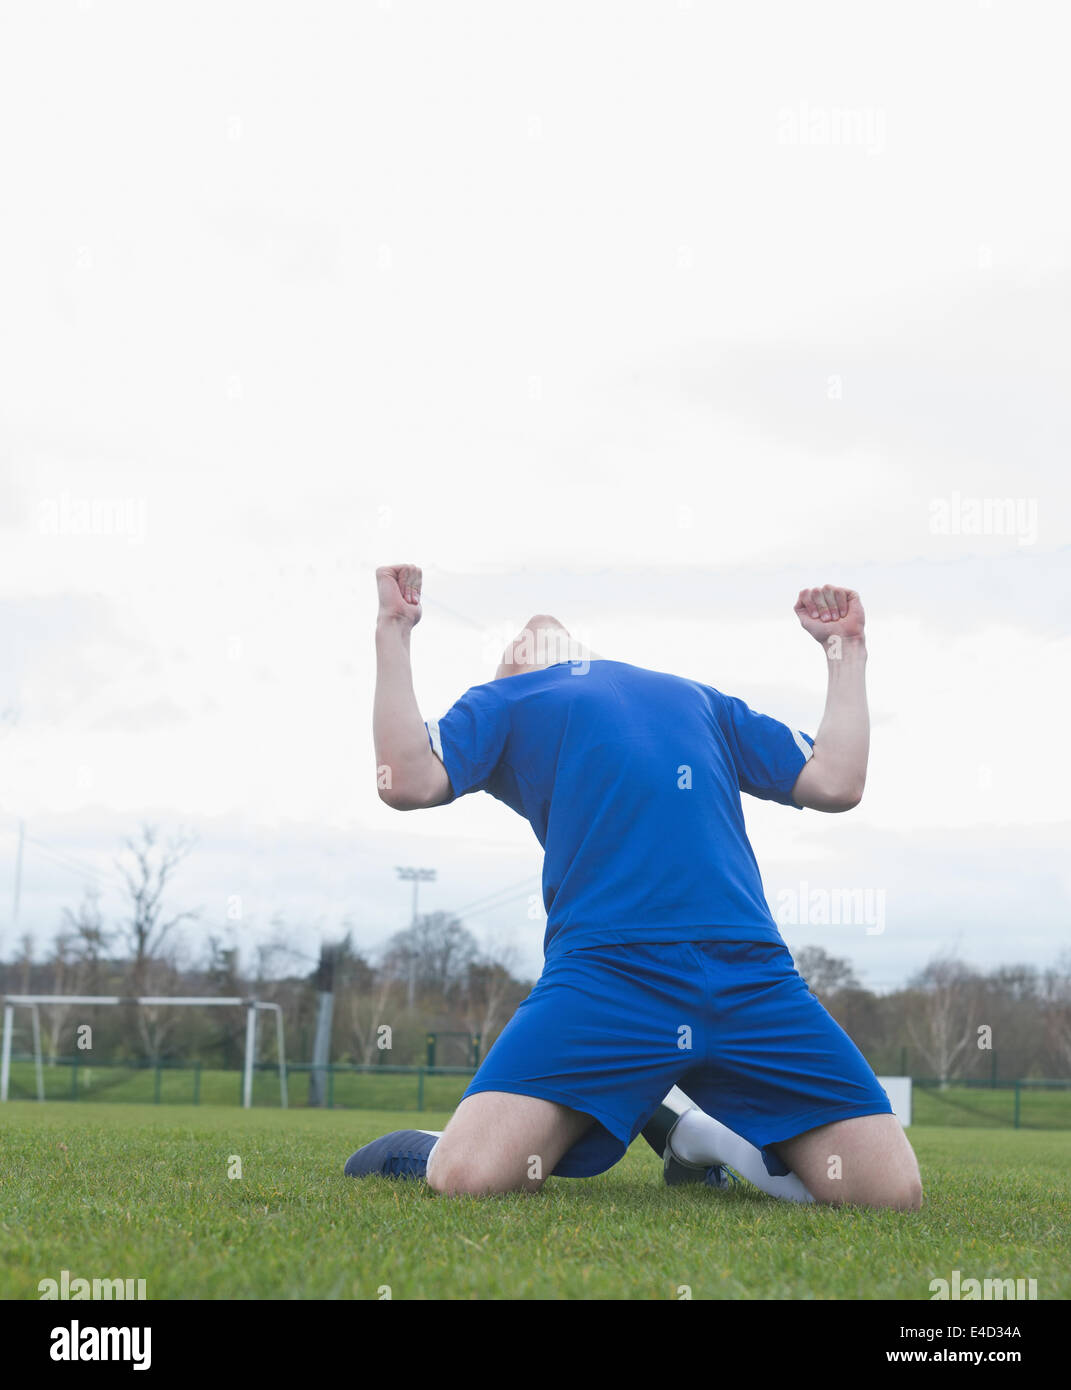 Football player in blue celebrating a victory Stock Photo